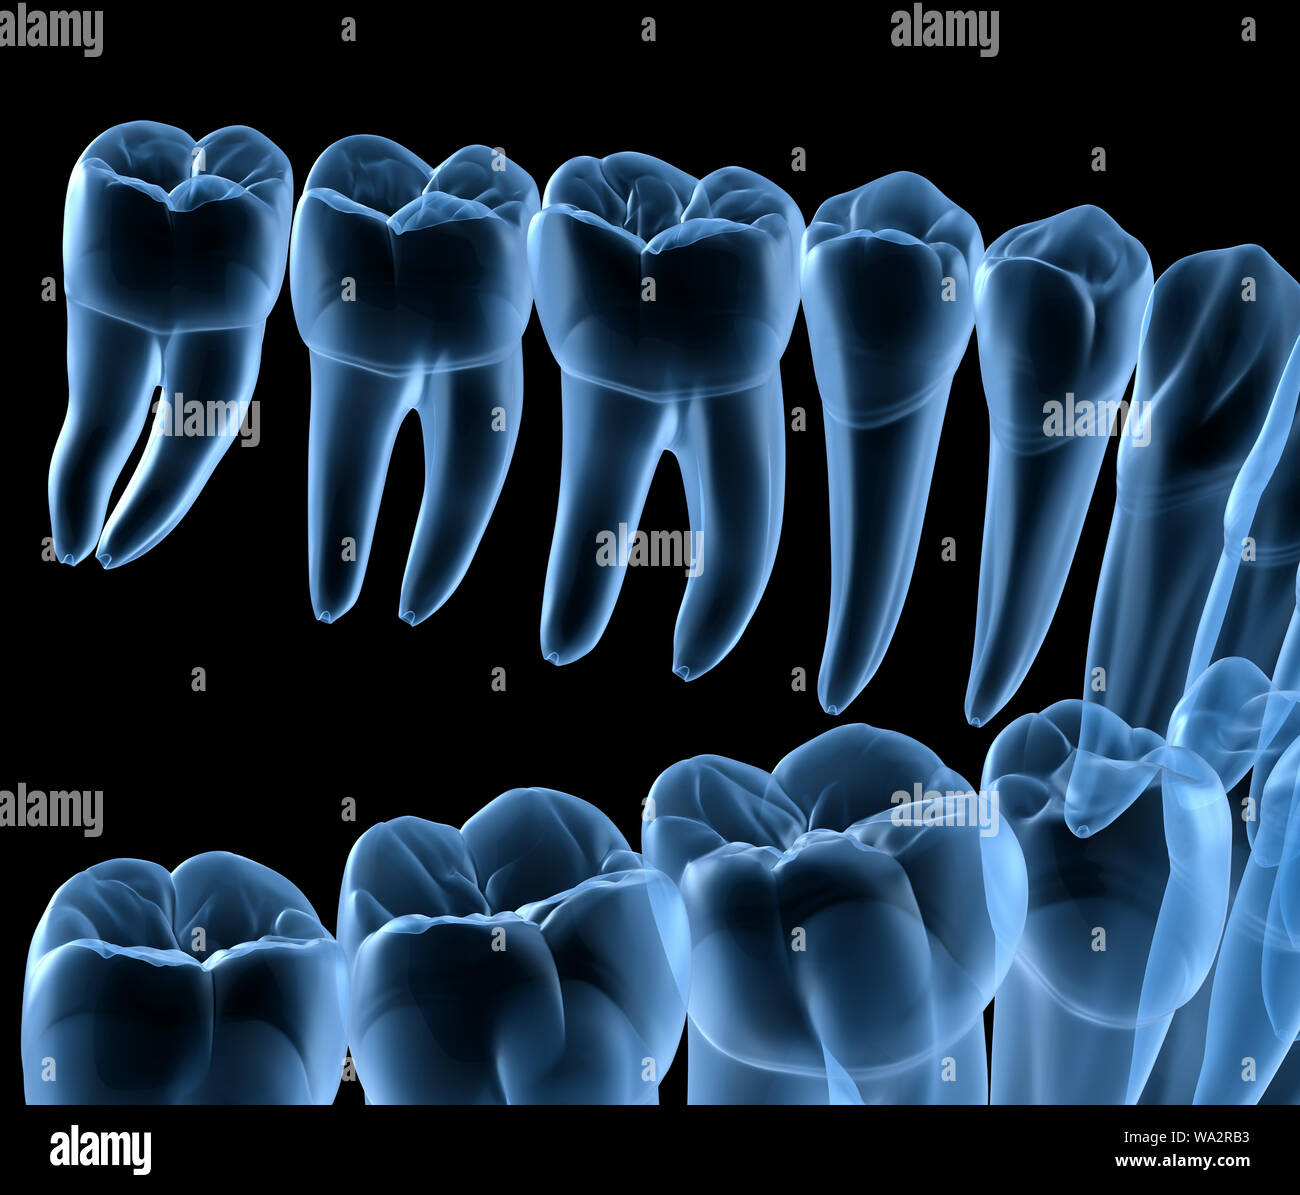 Dental Anatomy of mandibular human gum and teeth, x-ray view. Medically accurate tooth 3D illustration Stock Photo